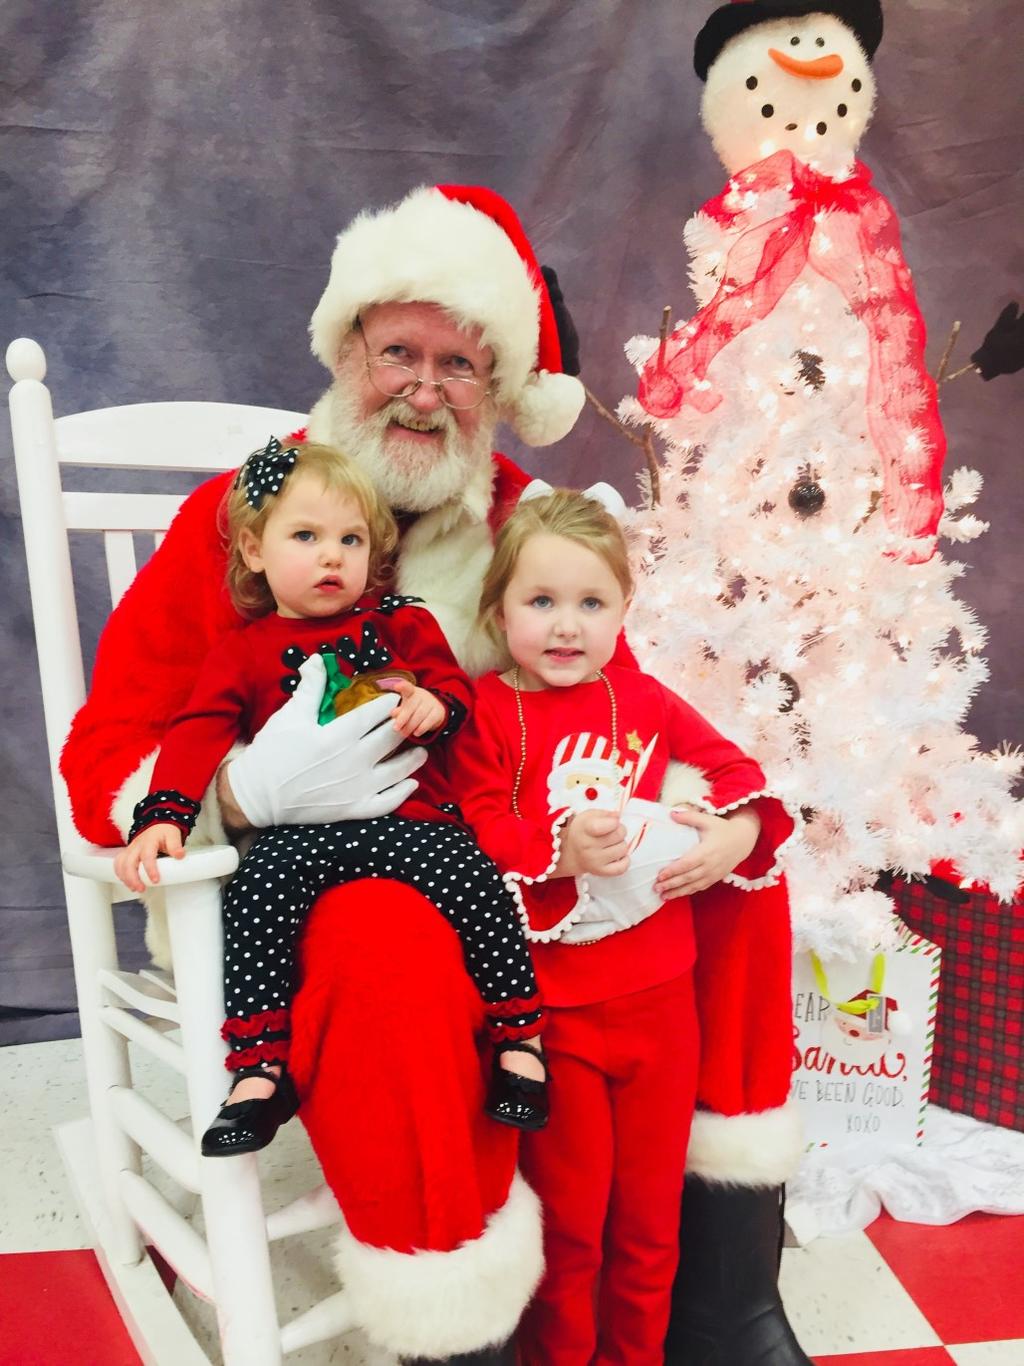 PAST EVENTS LUNCH WITH SANTA 2018